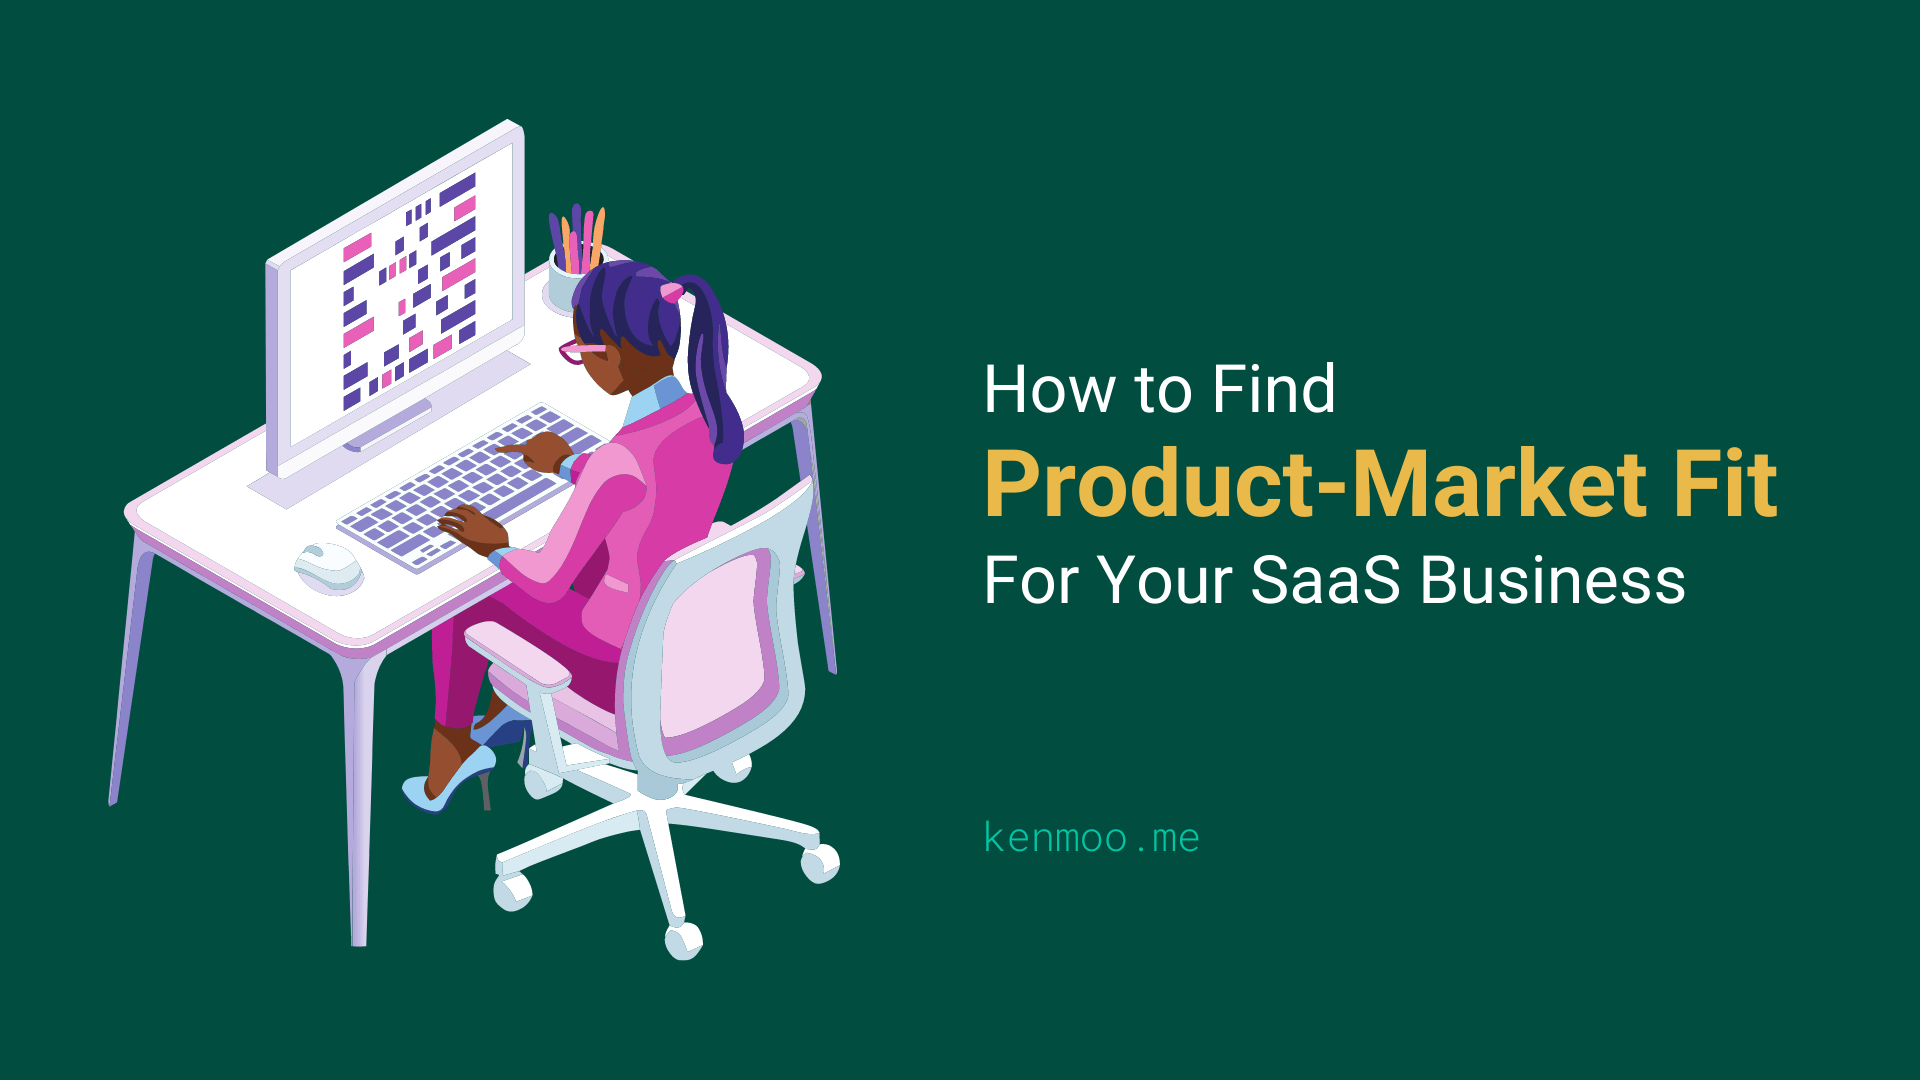 How To Find Product-Market Fit For Your SaaS Business